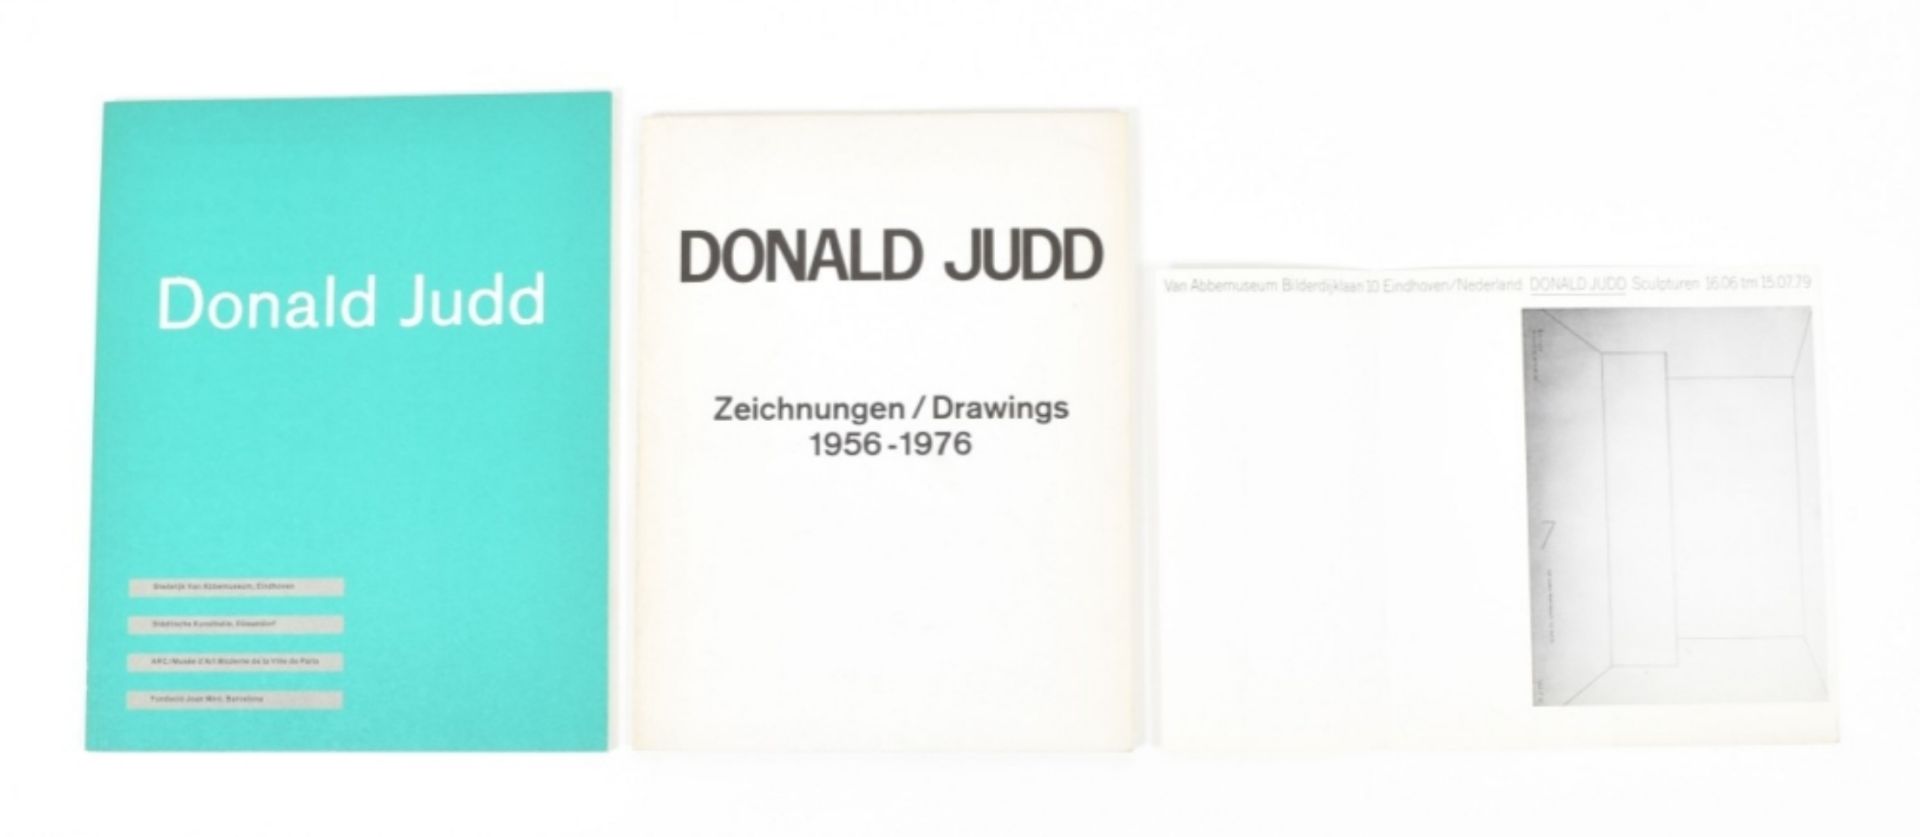 [s and 1970s] Donald Judd 